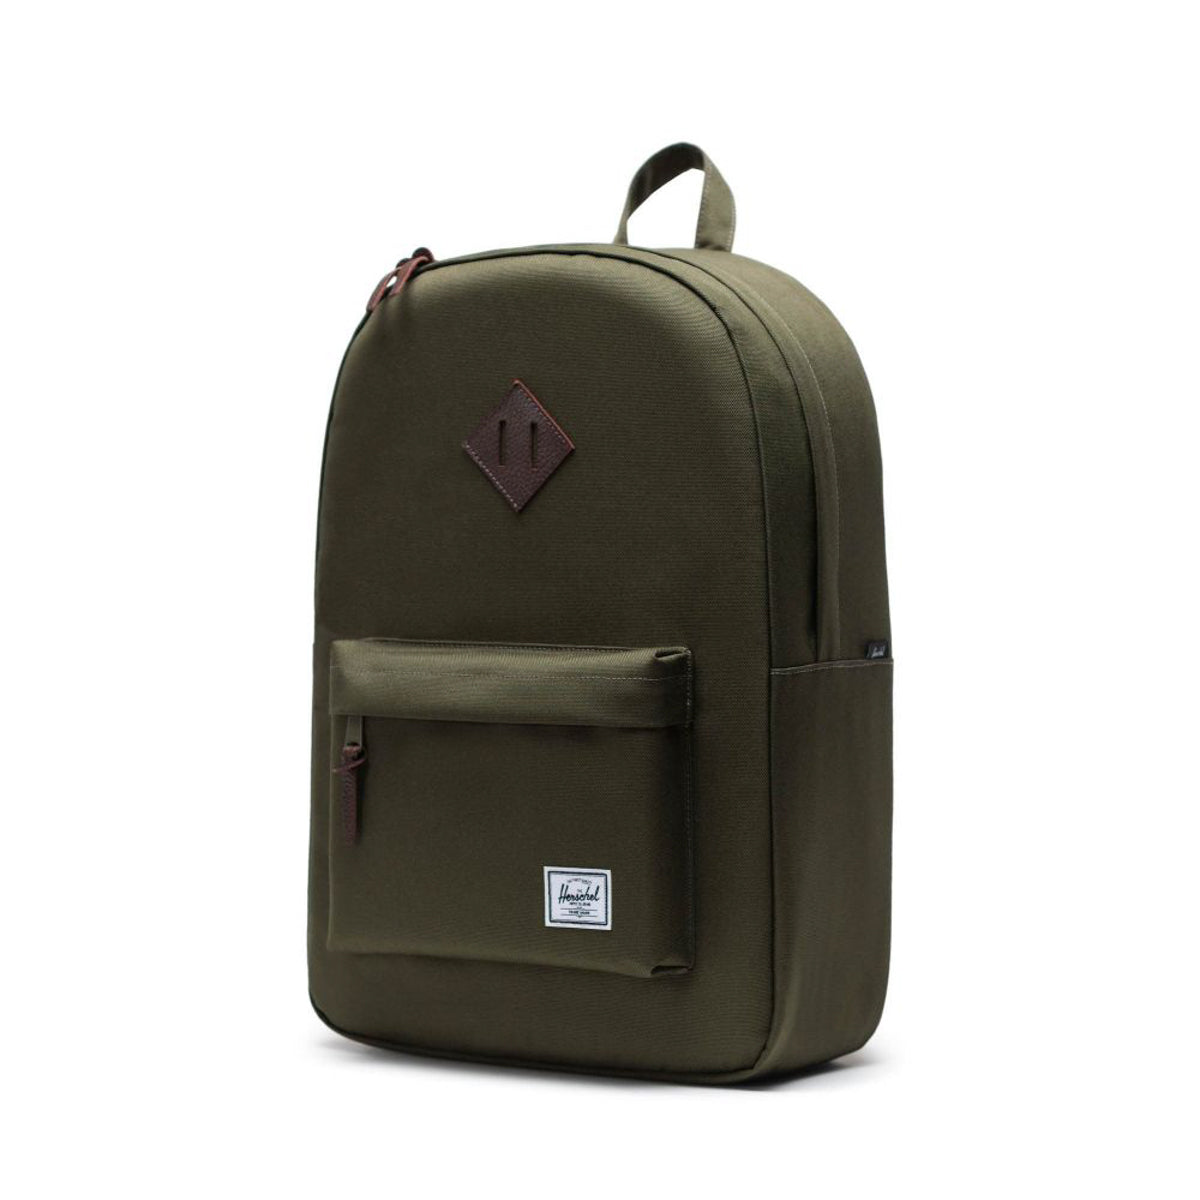 Heritage Backpack - Ivy Green/Chicory Coffee